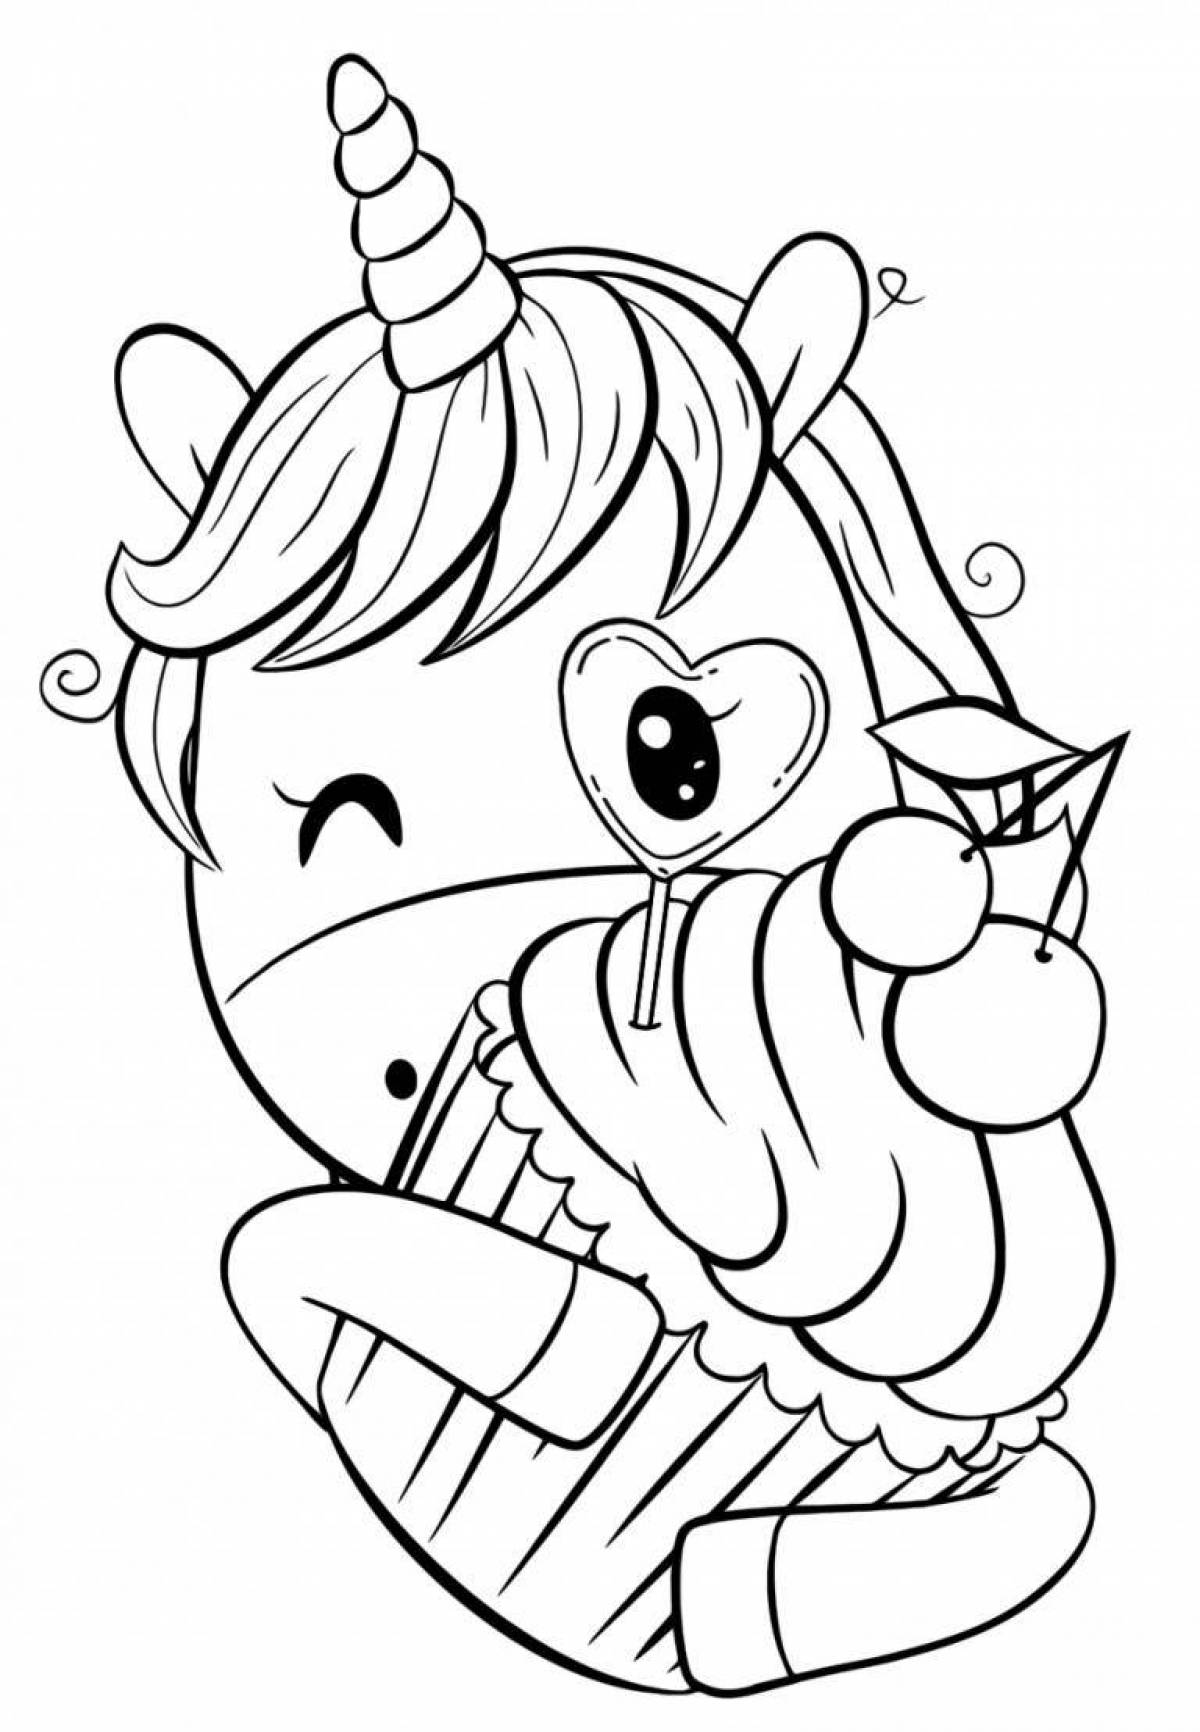 Coloring for girls cute unicorn